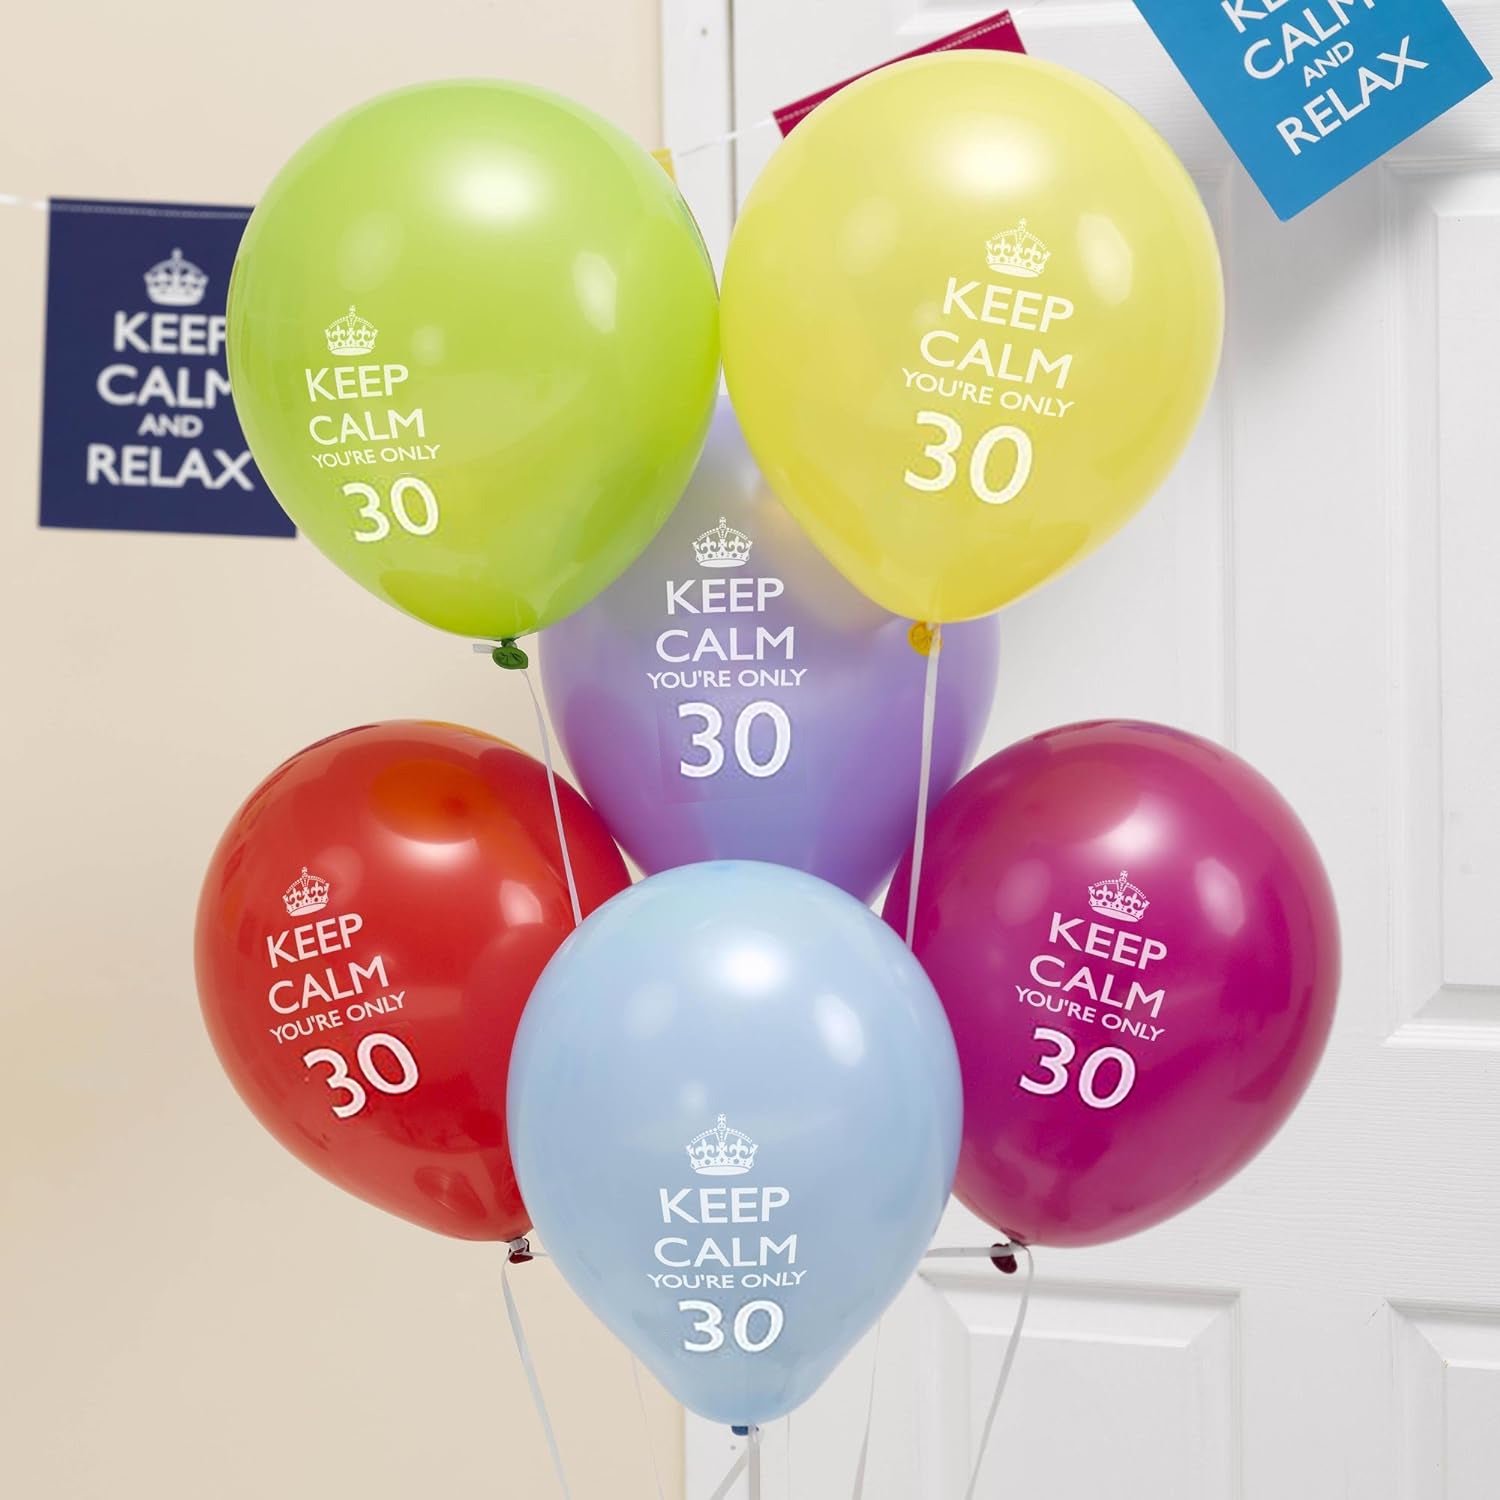 Keep Calm You're Only 30 Balloons - Pack of 8